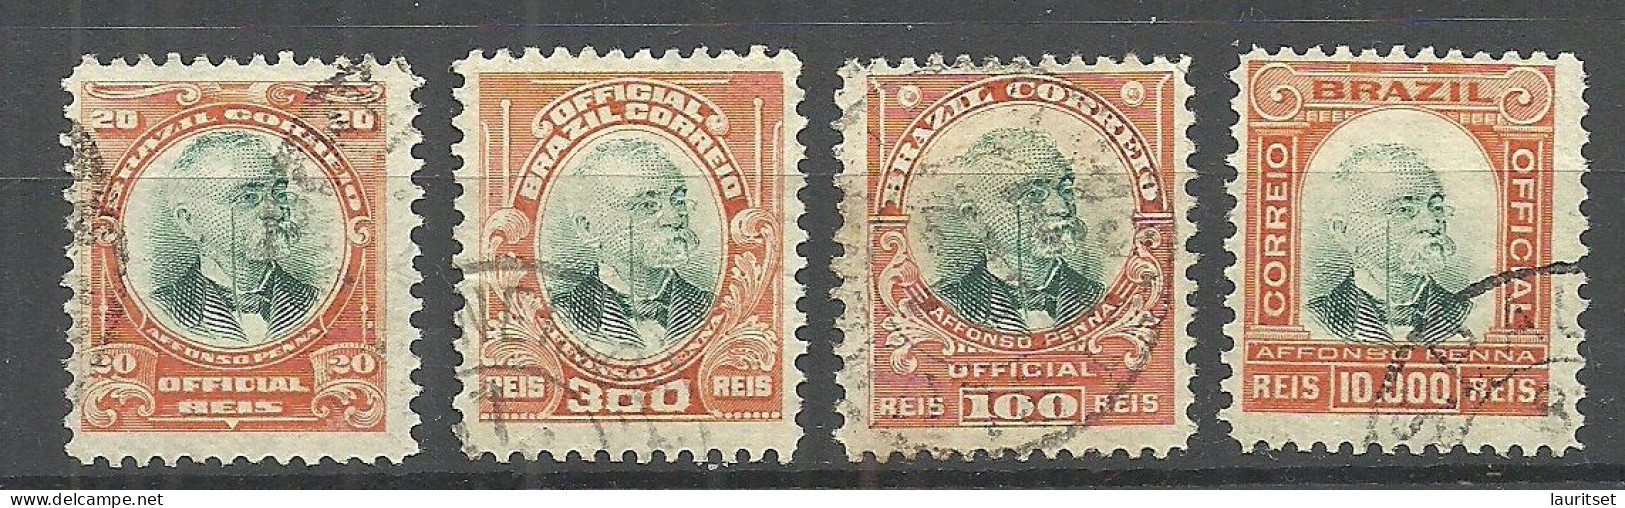 BRAZIL Brazilia Official Tax, 4 Stamps, O - Officials